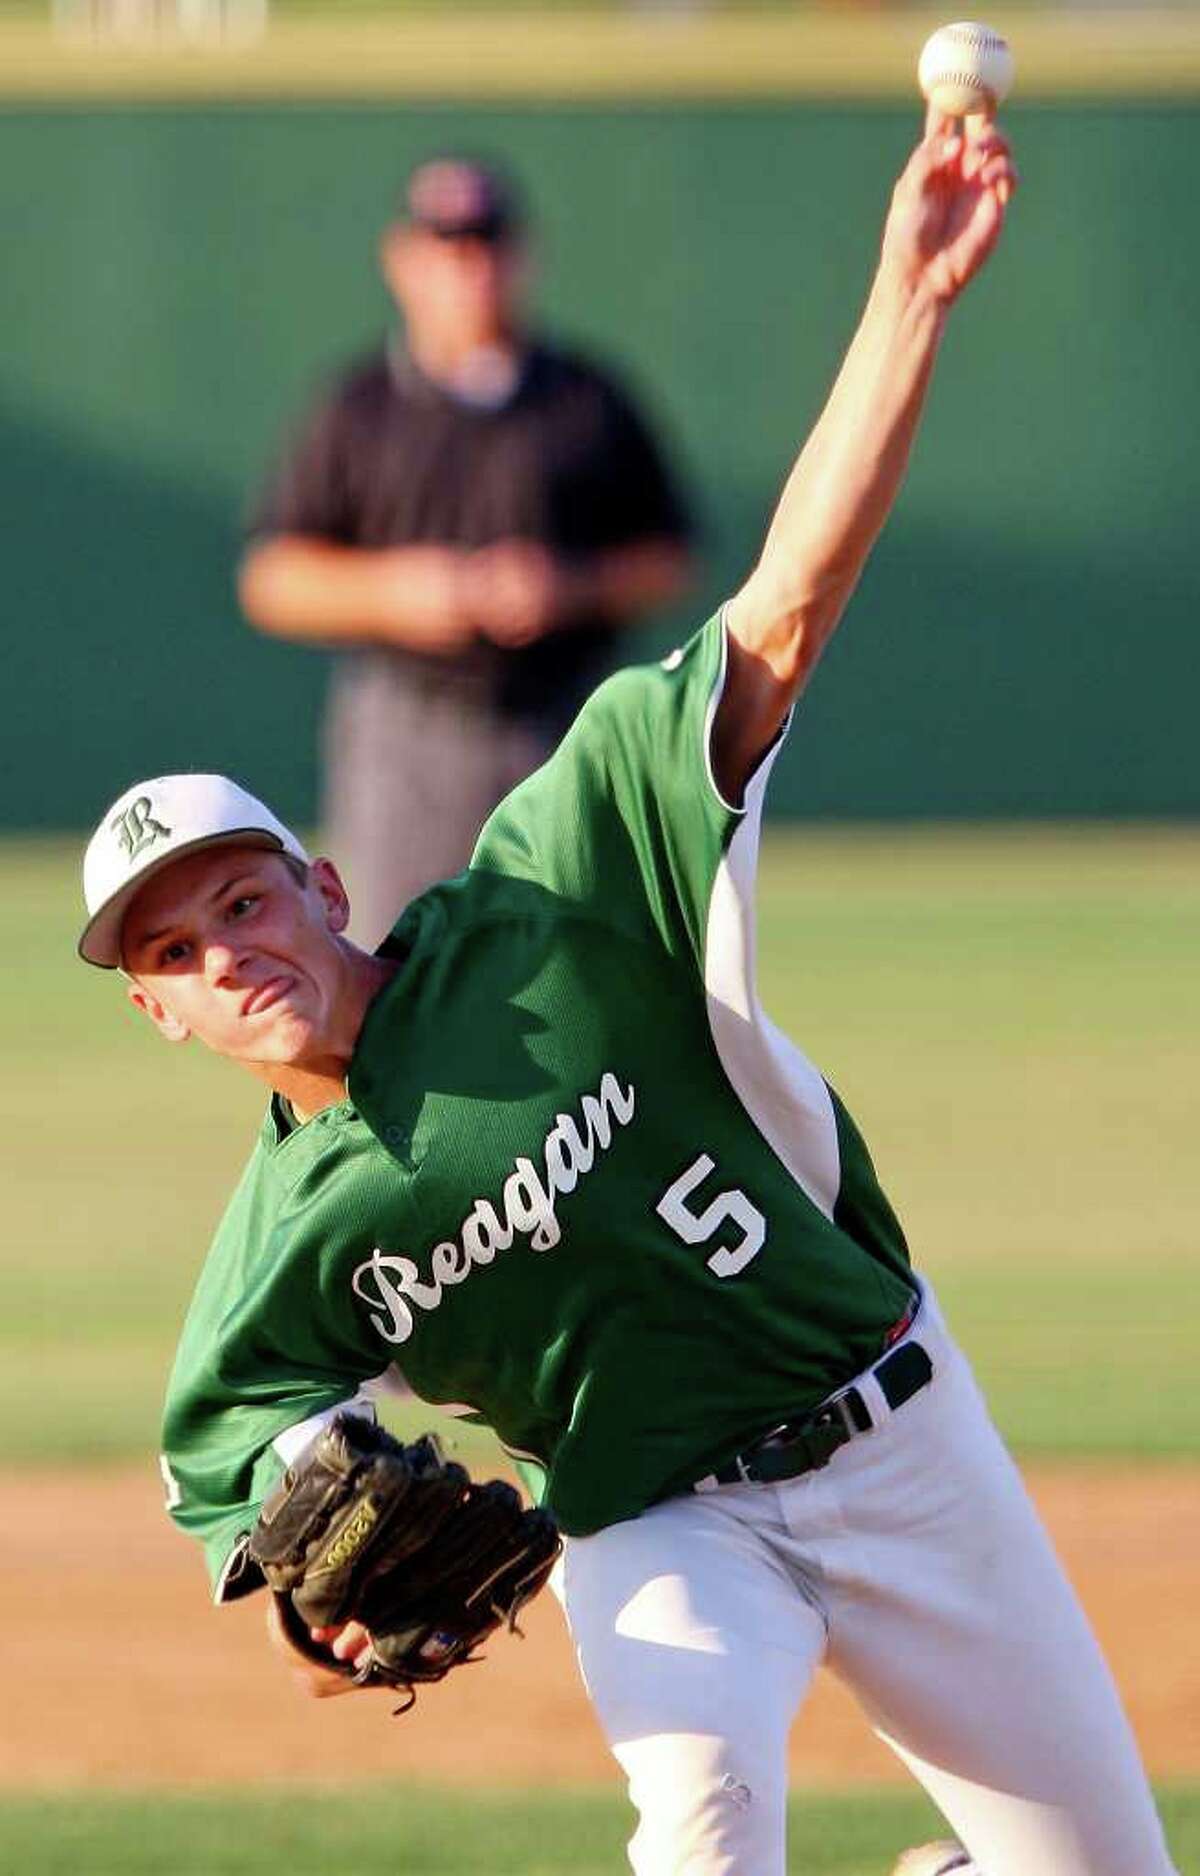 Reagan pitcher Austin Hays — seen here in a 2011 game against Brandeis — threw 12 scoreless innings with two hits allowed and 26 strikeouts in Reagan's shutouts of Smithson Valley and Corpus Christi Moody. He had 14 strikeouts with no walks in a 3-0 victory against Smithson Valley on Monday and 12 strikeouts in a 2-0 victory against Moody on Saturday.